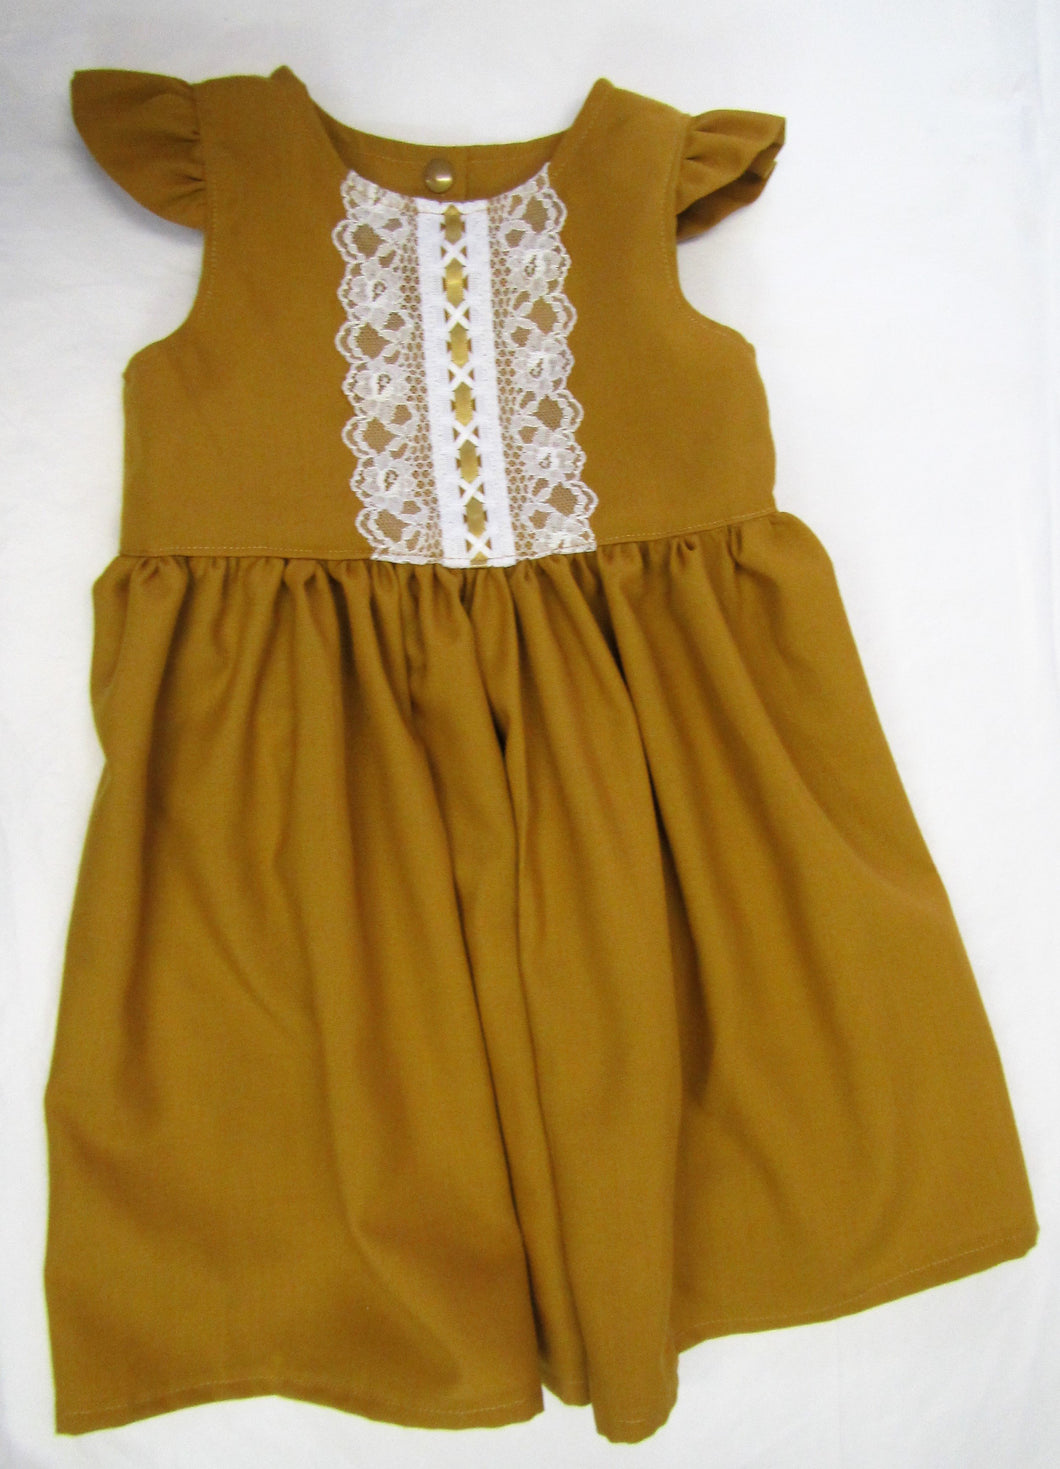 Handcrafted mustard lace ribbons dress 2 years